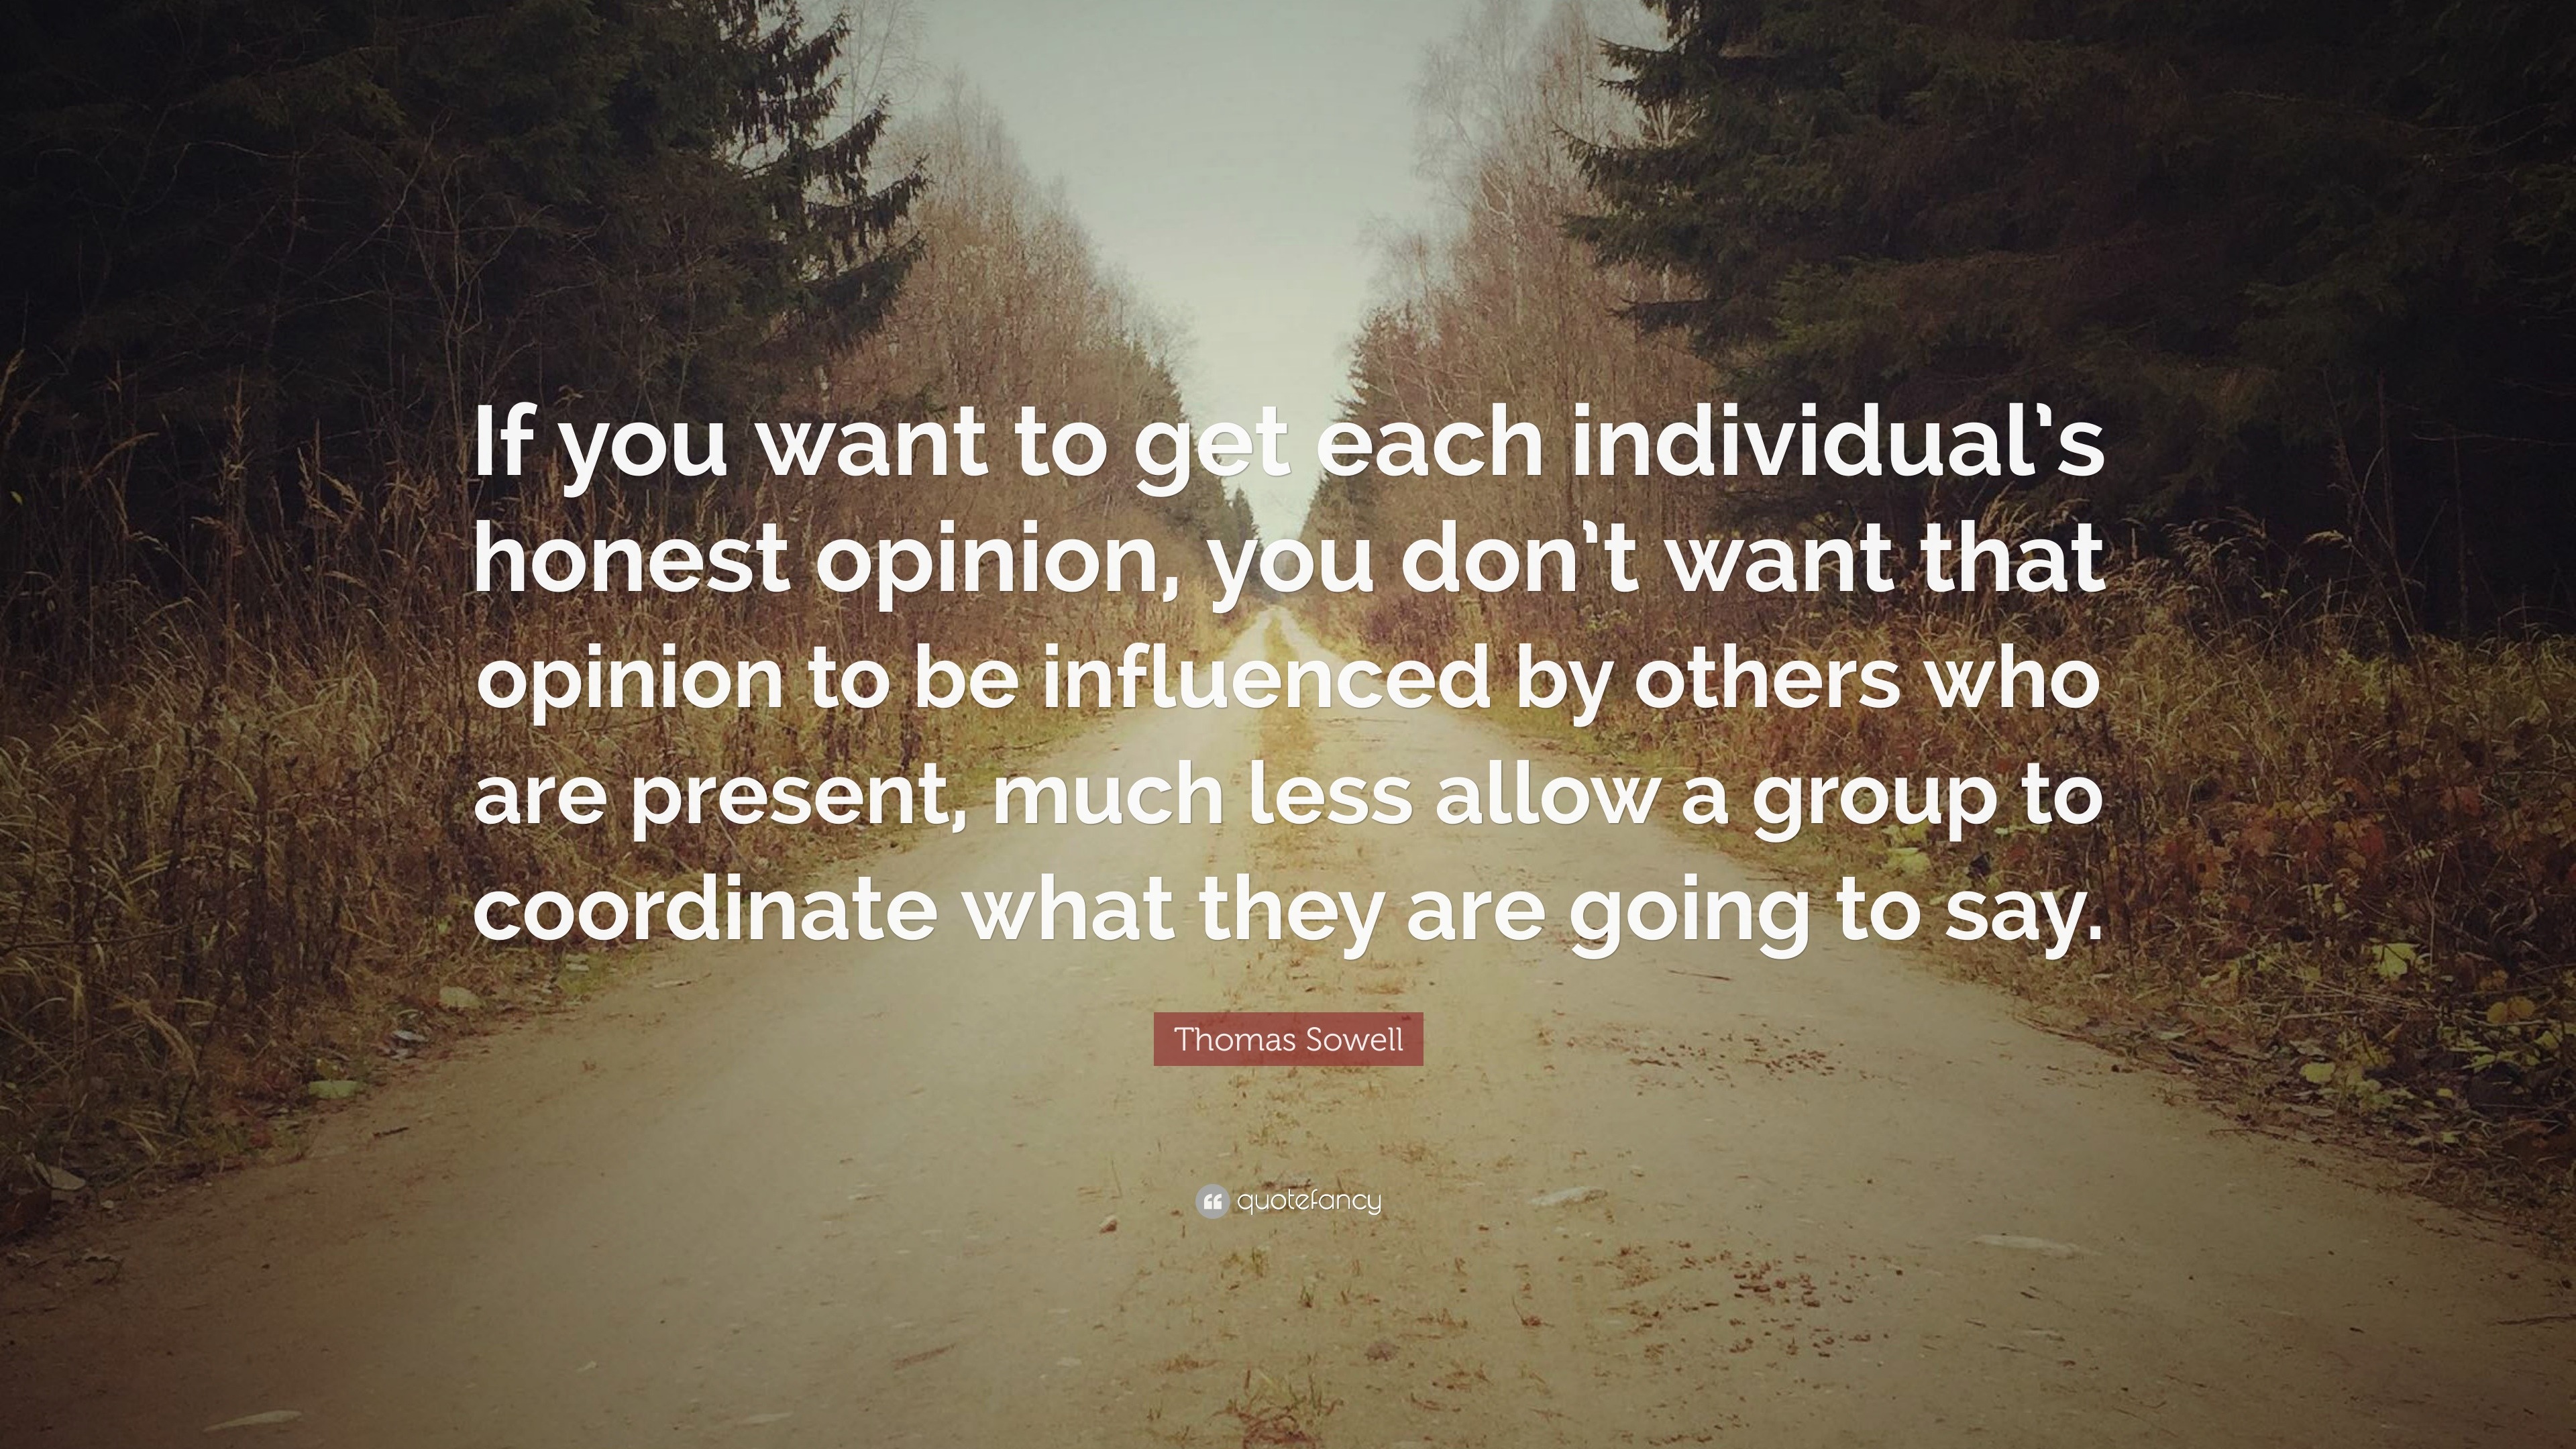 Thomas Sowell Quote: “If You Want To Get Each Individual's Honest Opinion, You Don't Want That Opinion To Be Influenced By Others Who Are Pres...”